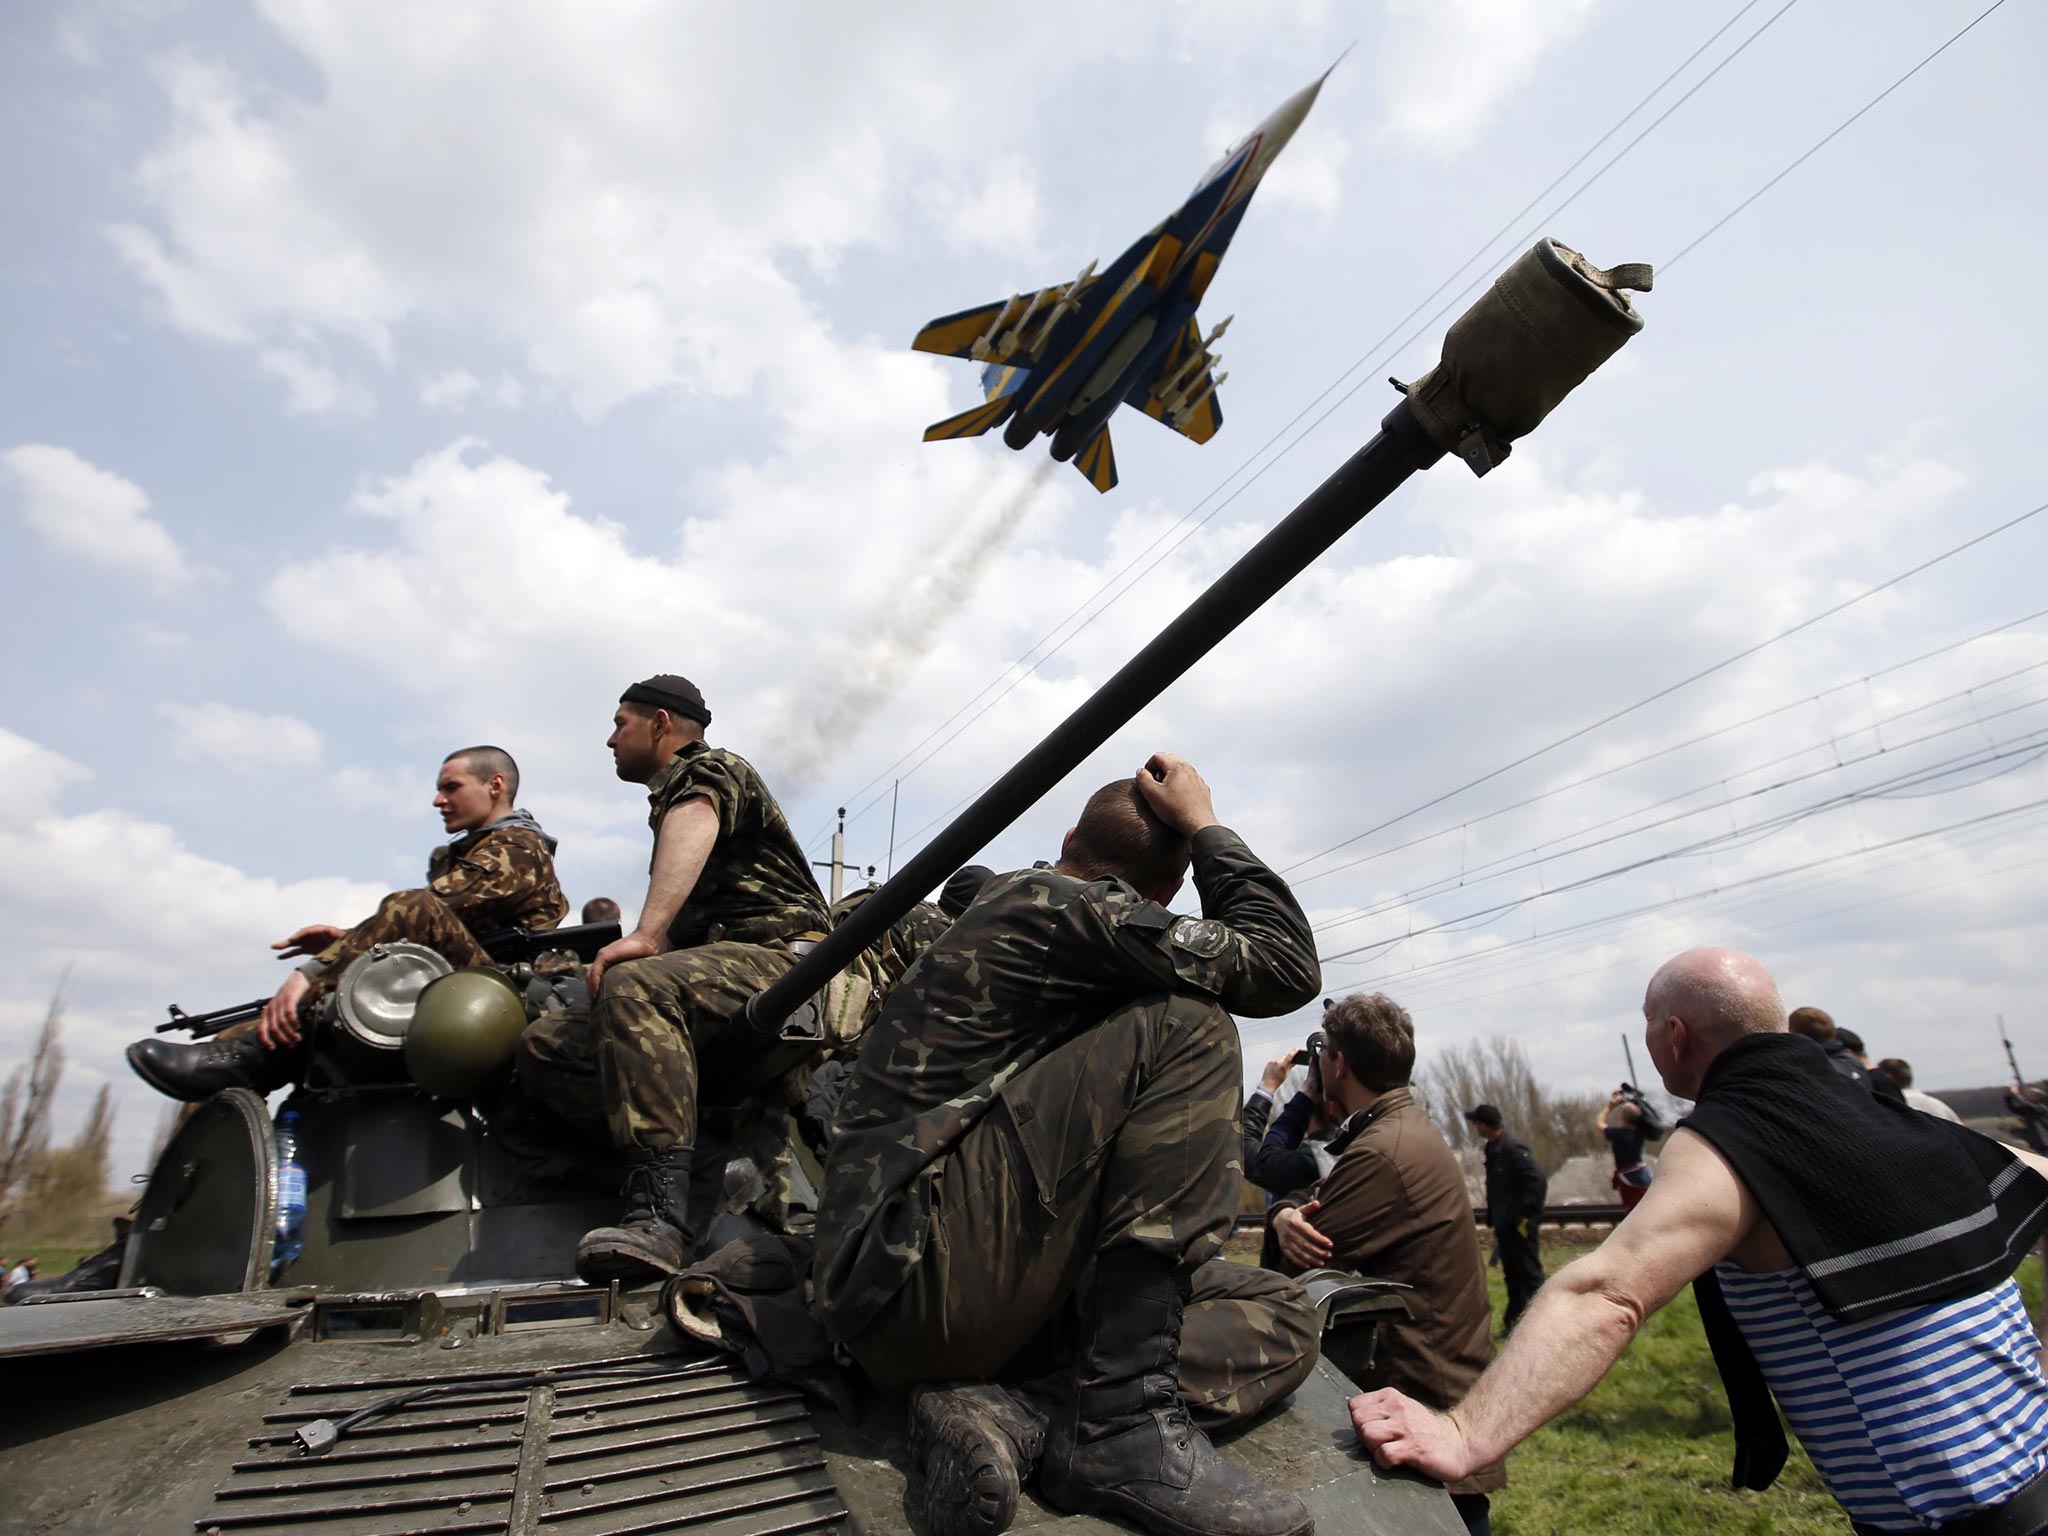 A fighter jet flies above as Ukrainian soldiers sit on an armoured personnel carrier in Kramatorsk, Ukraine